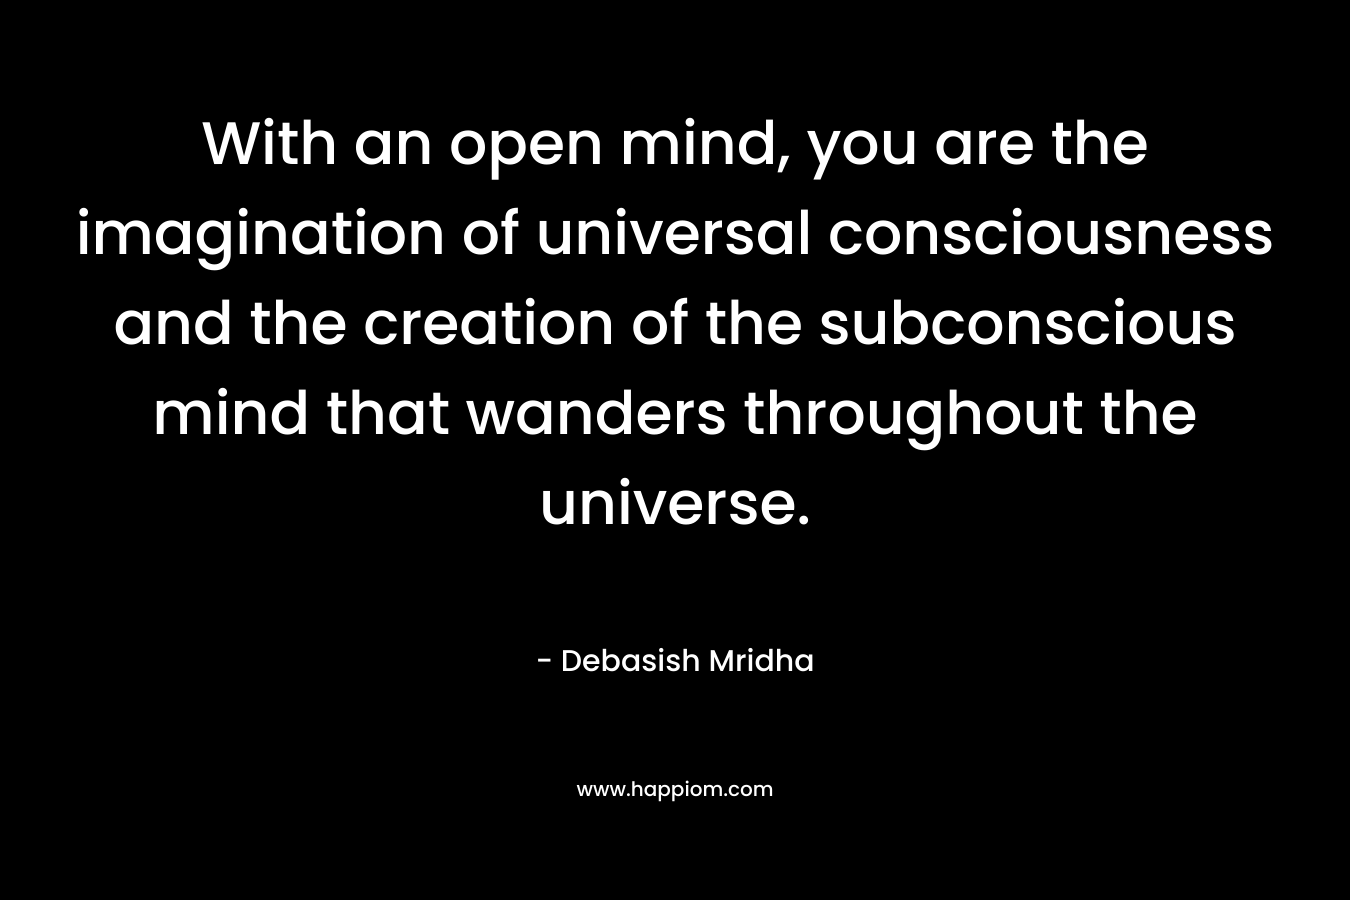 With an open mind, you are the imagination of universal consciousness and the creation of the subconscious mind that wanders throughout the universe.